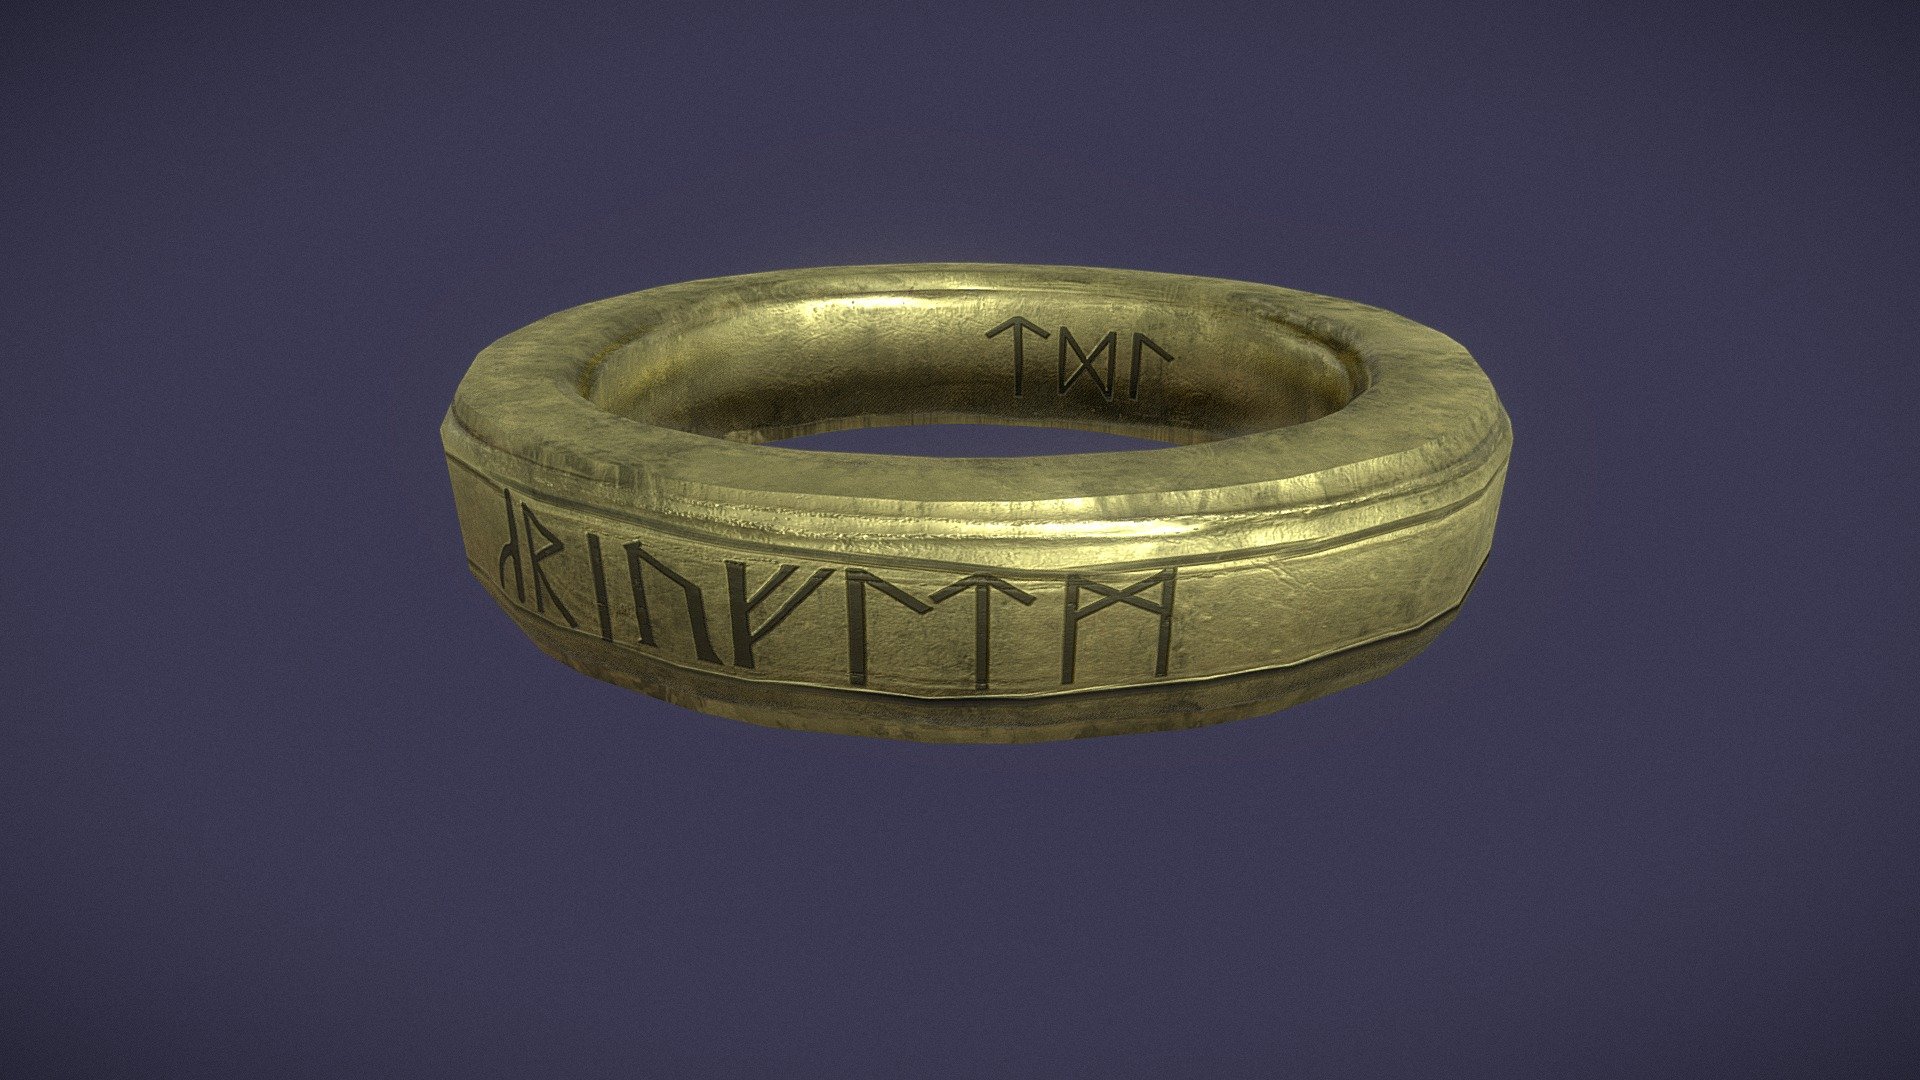 Medieval Ring Anglo Saxon Ring 3D Model Low Poly PBR Texture Available in 4096 x 4096 scaled to real world scale. Customer Service Guaranteed. From the Creators at Get Dead Entertainment. Please like and Rate! Follow us on FaceBook and Instagram to keep updated on all our newest models. https://www.facebook.com/GetDeadEntertainment/ - Medieval Ring - Buy Royalty Free 3D model by GetDeadEntertainment 3d model